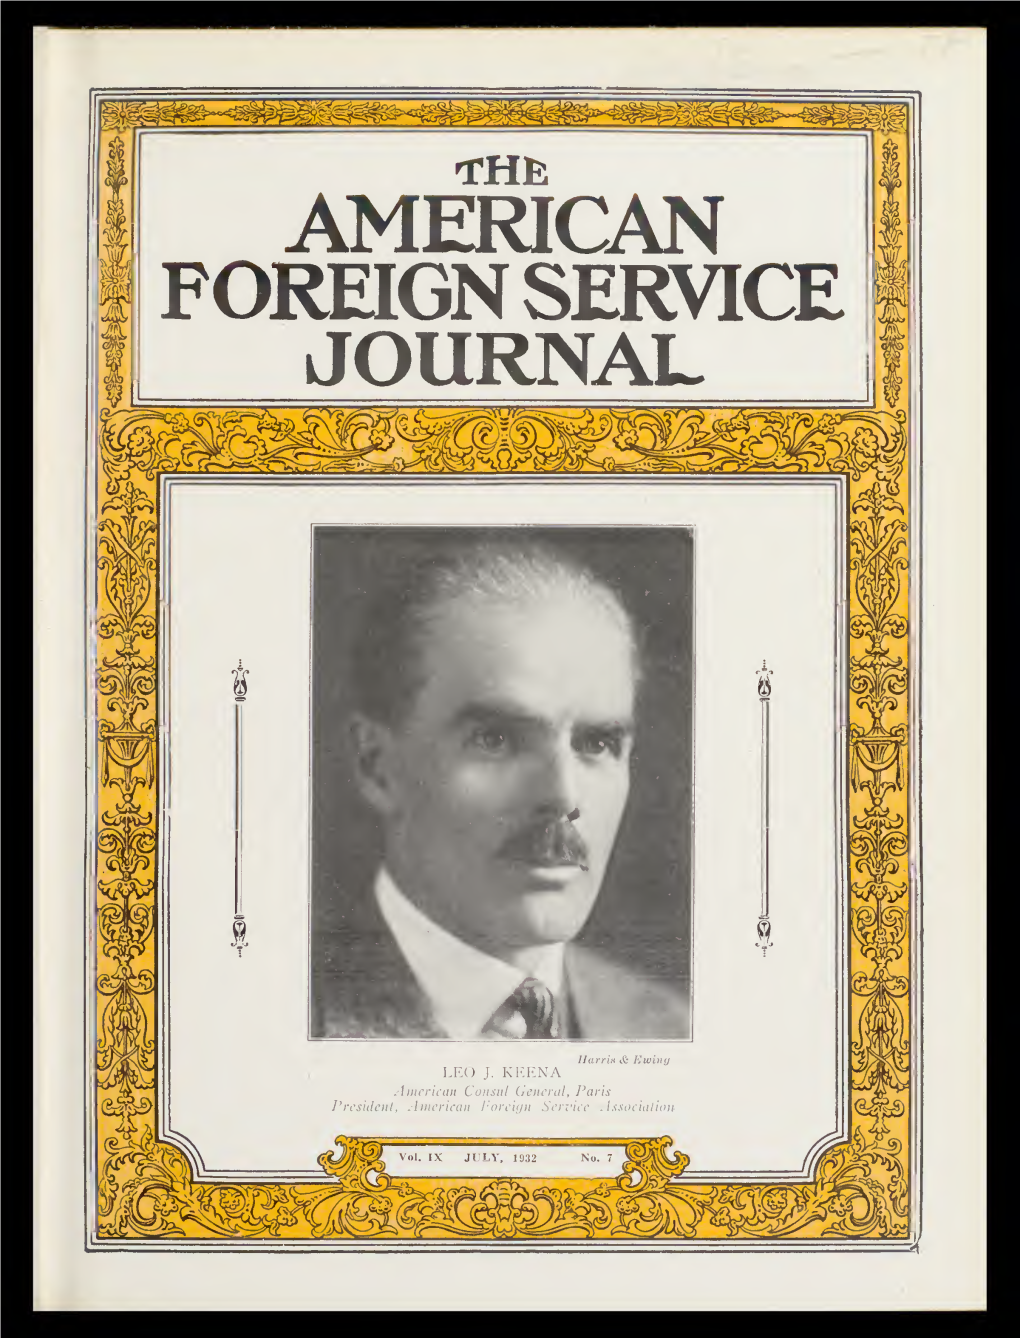 The Foreign Service Journal, July 1932